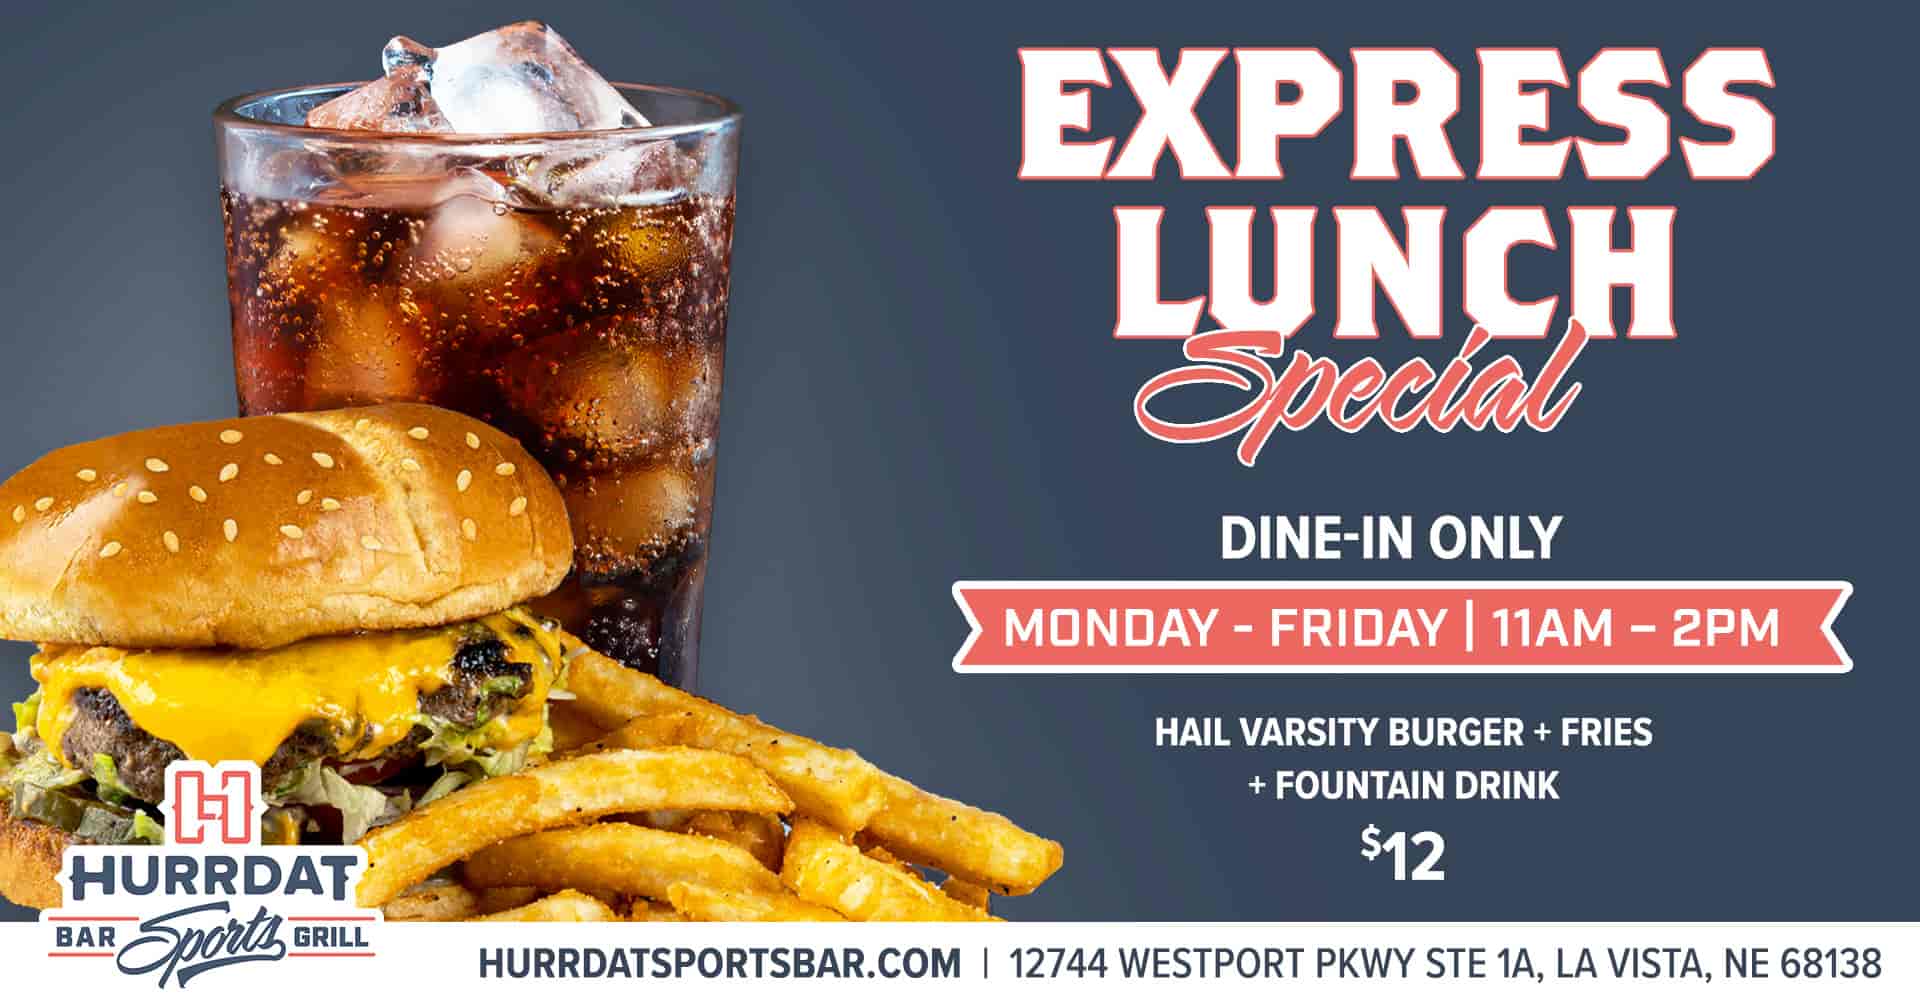 Express Lunch Special at Hurrdat Sports Bar for $12